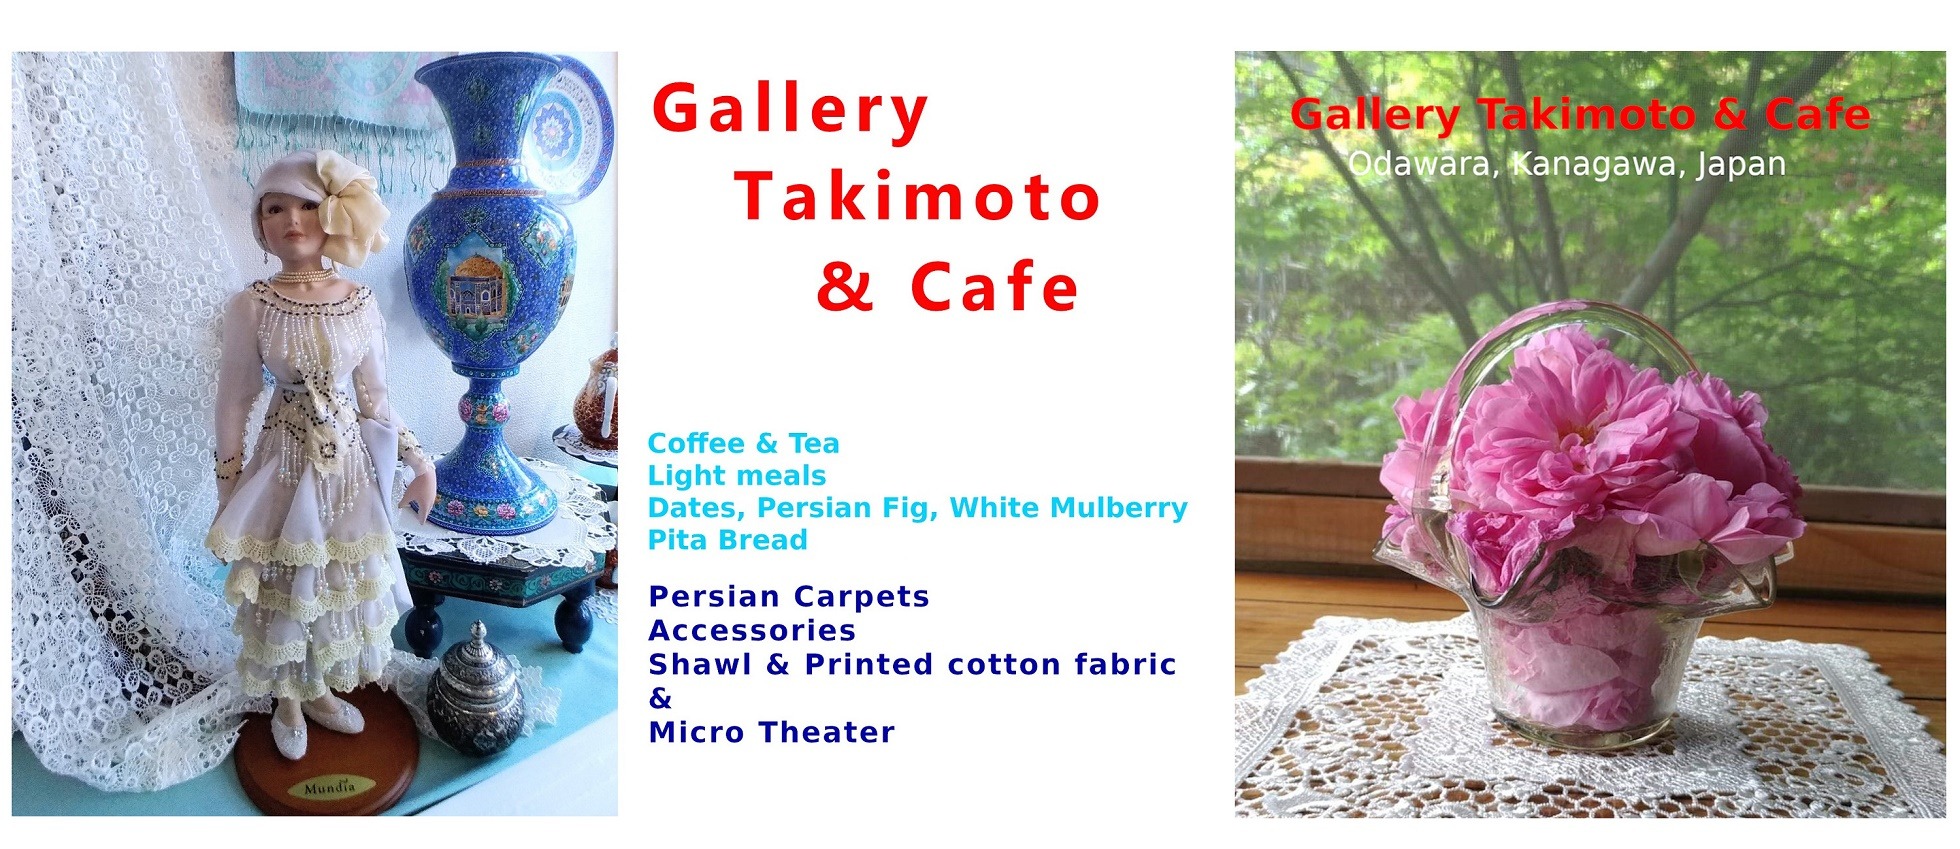 Gallery Takimoto and Cafe